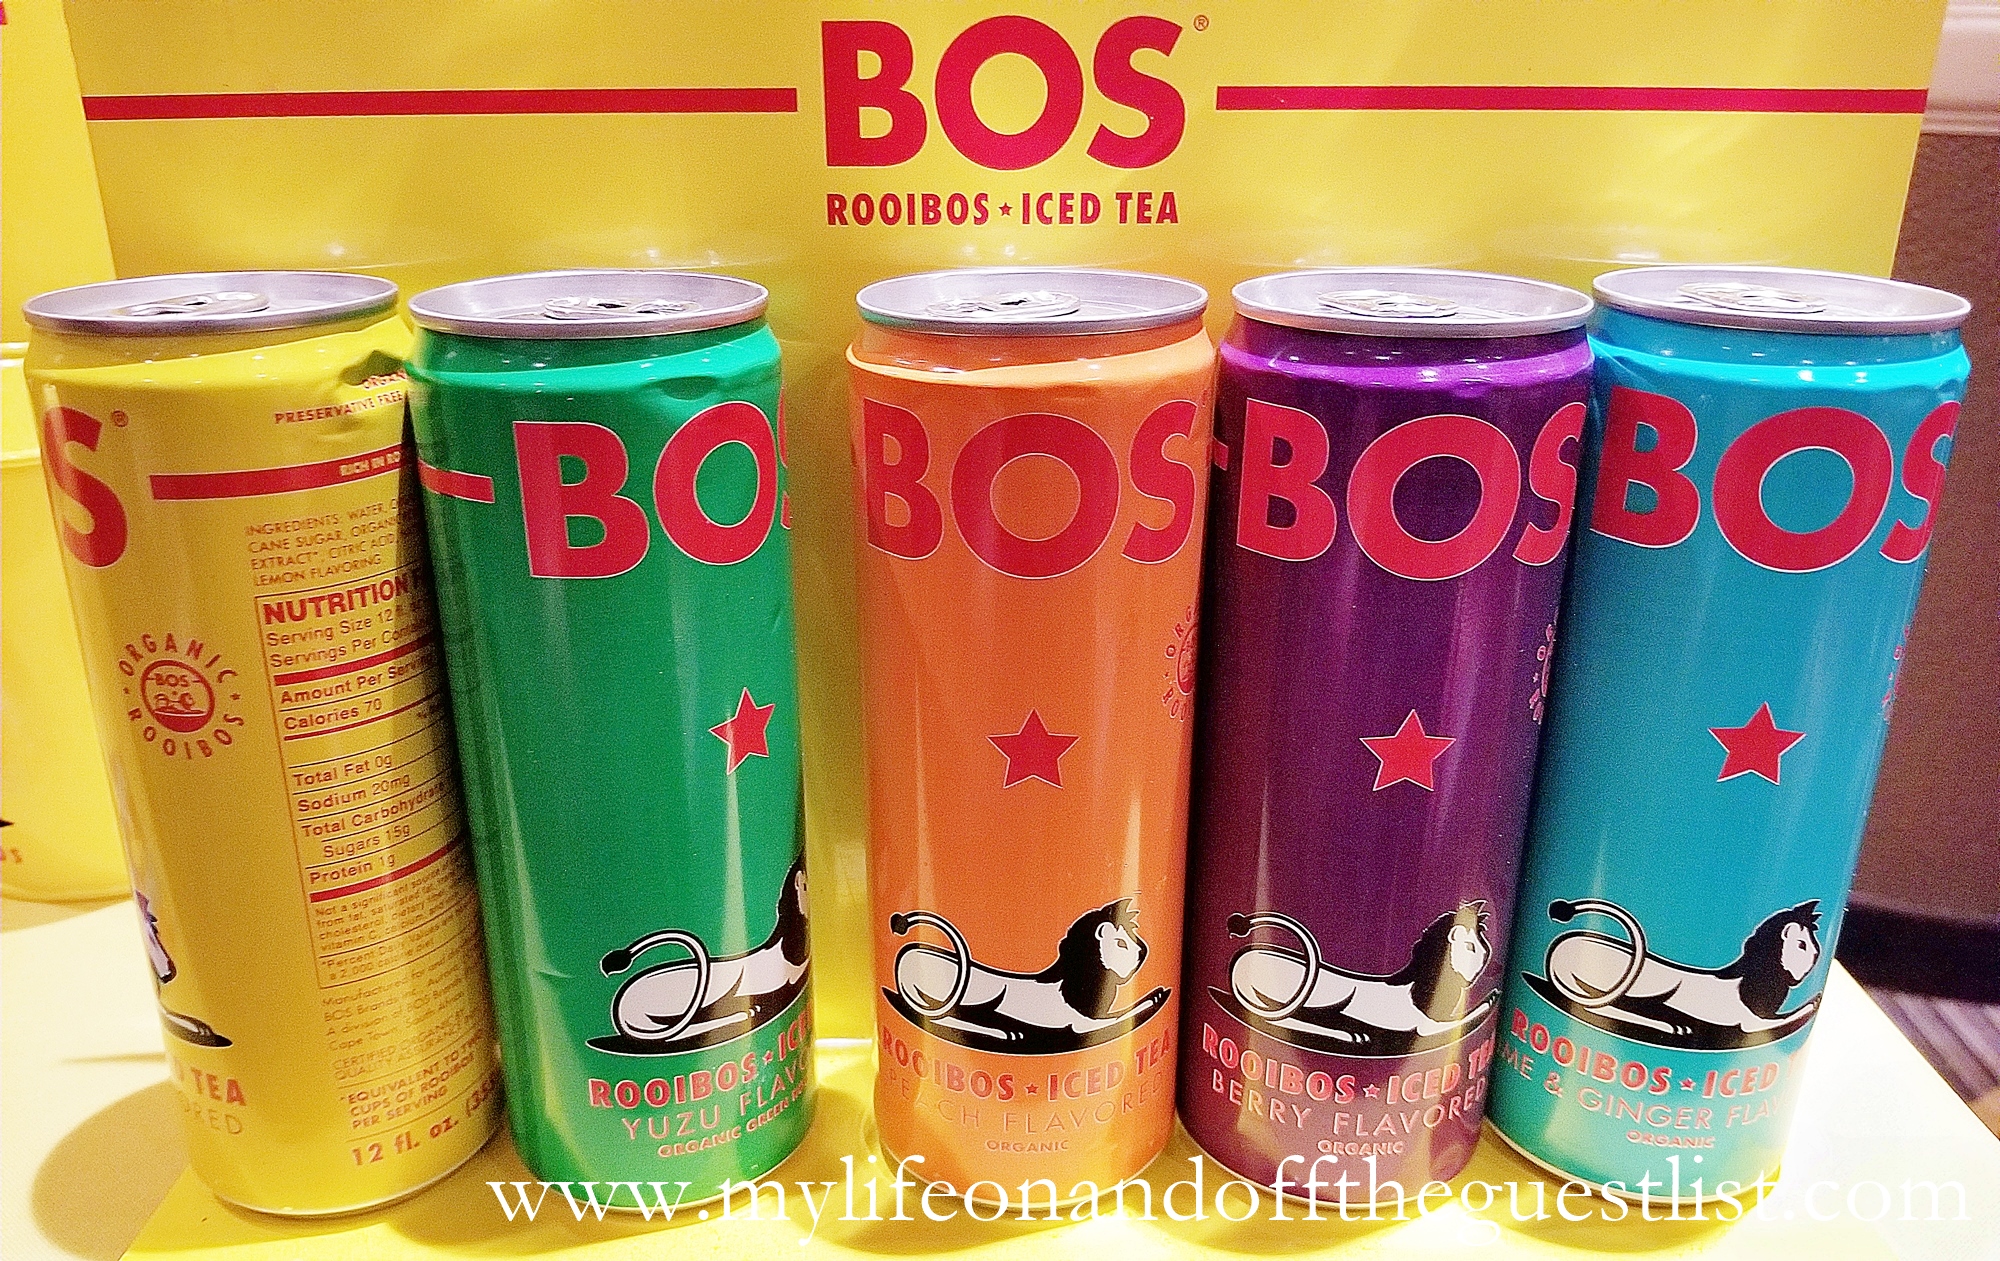 Ydmyge Elendig bue Sip This Tea: What We Love About BOS Rooibos Iced Tea